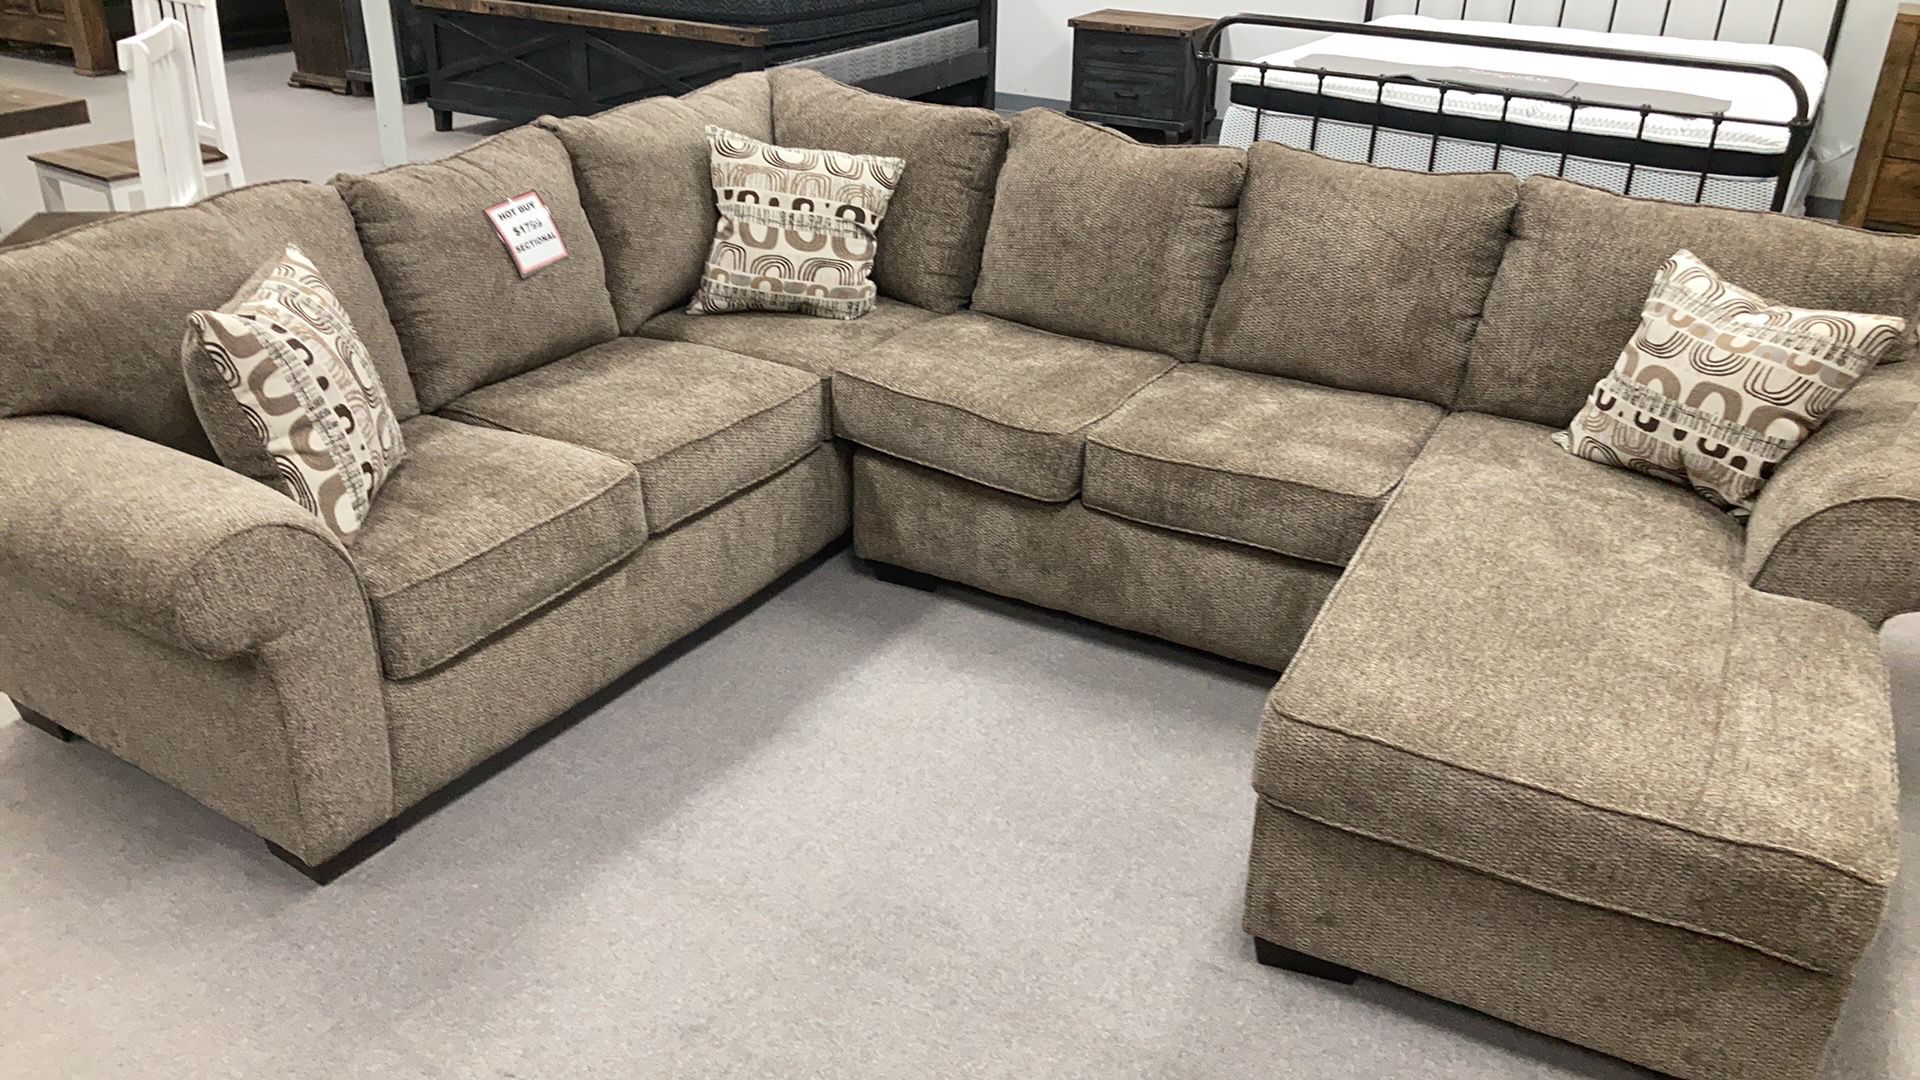 Brand New Jesse Coco Sectional With Reversible Ottoman! Low As $39 Down!! No Credit Needed!